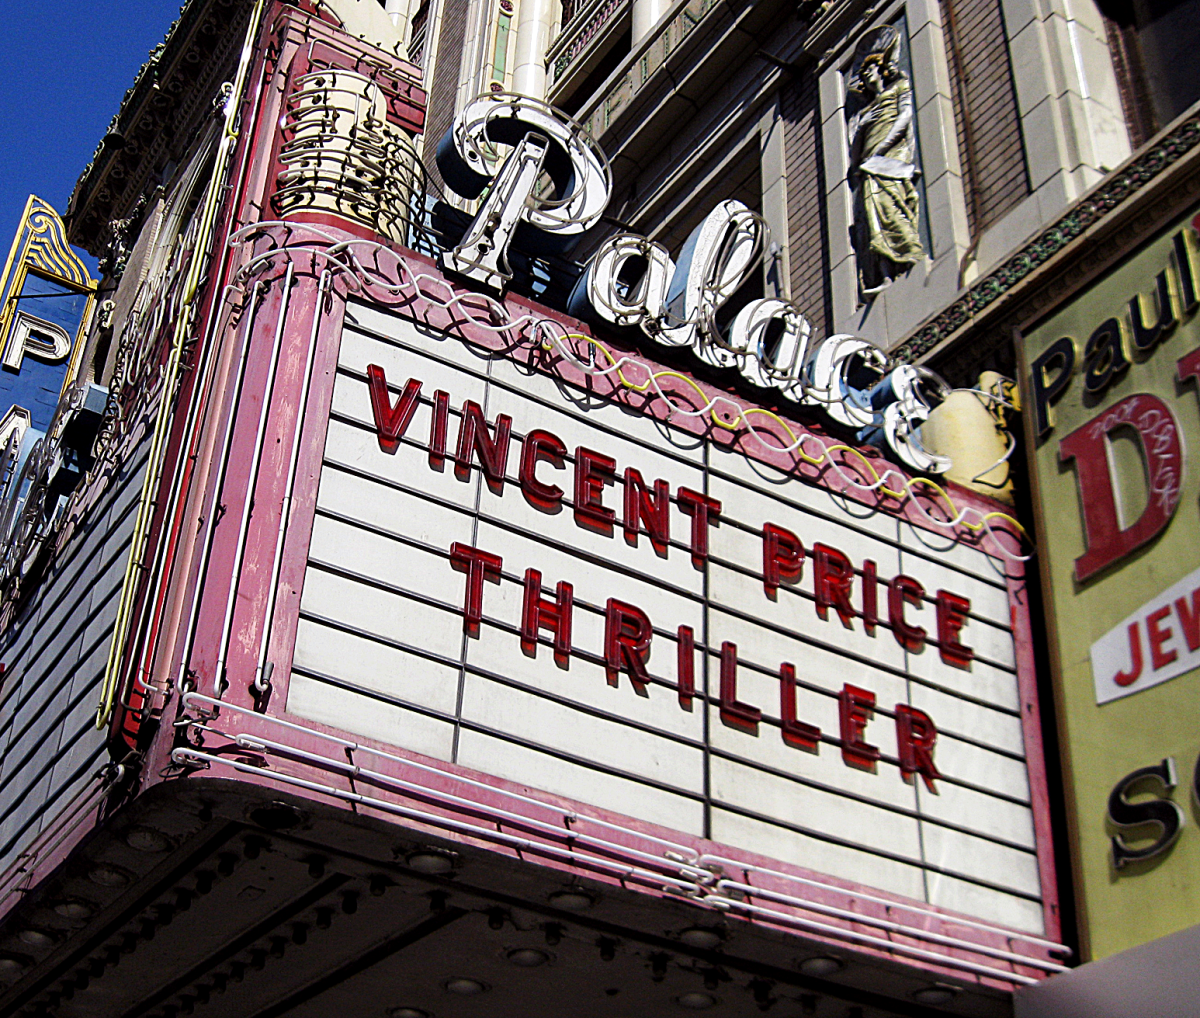 Marquee for The Palace in downtown Los Angeles. This is the movie theater used in the Thriller video.